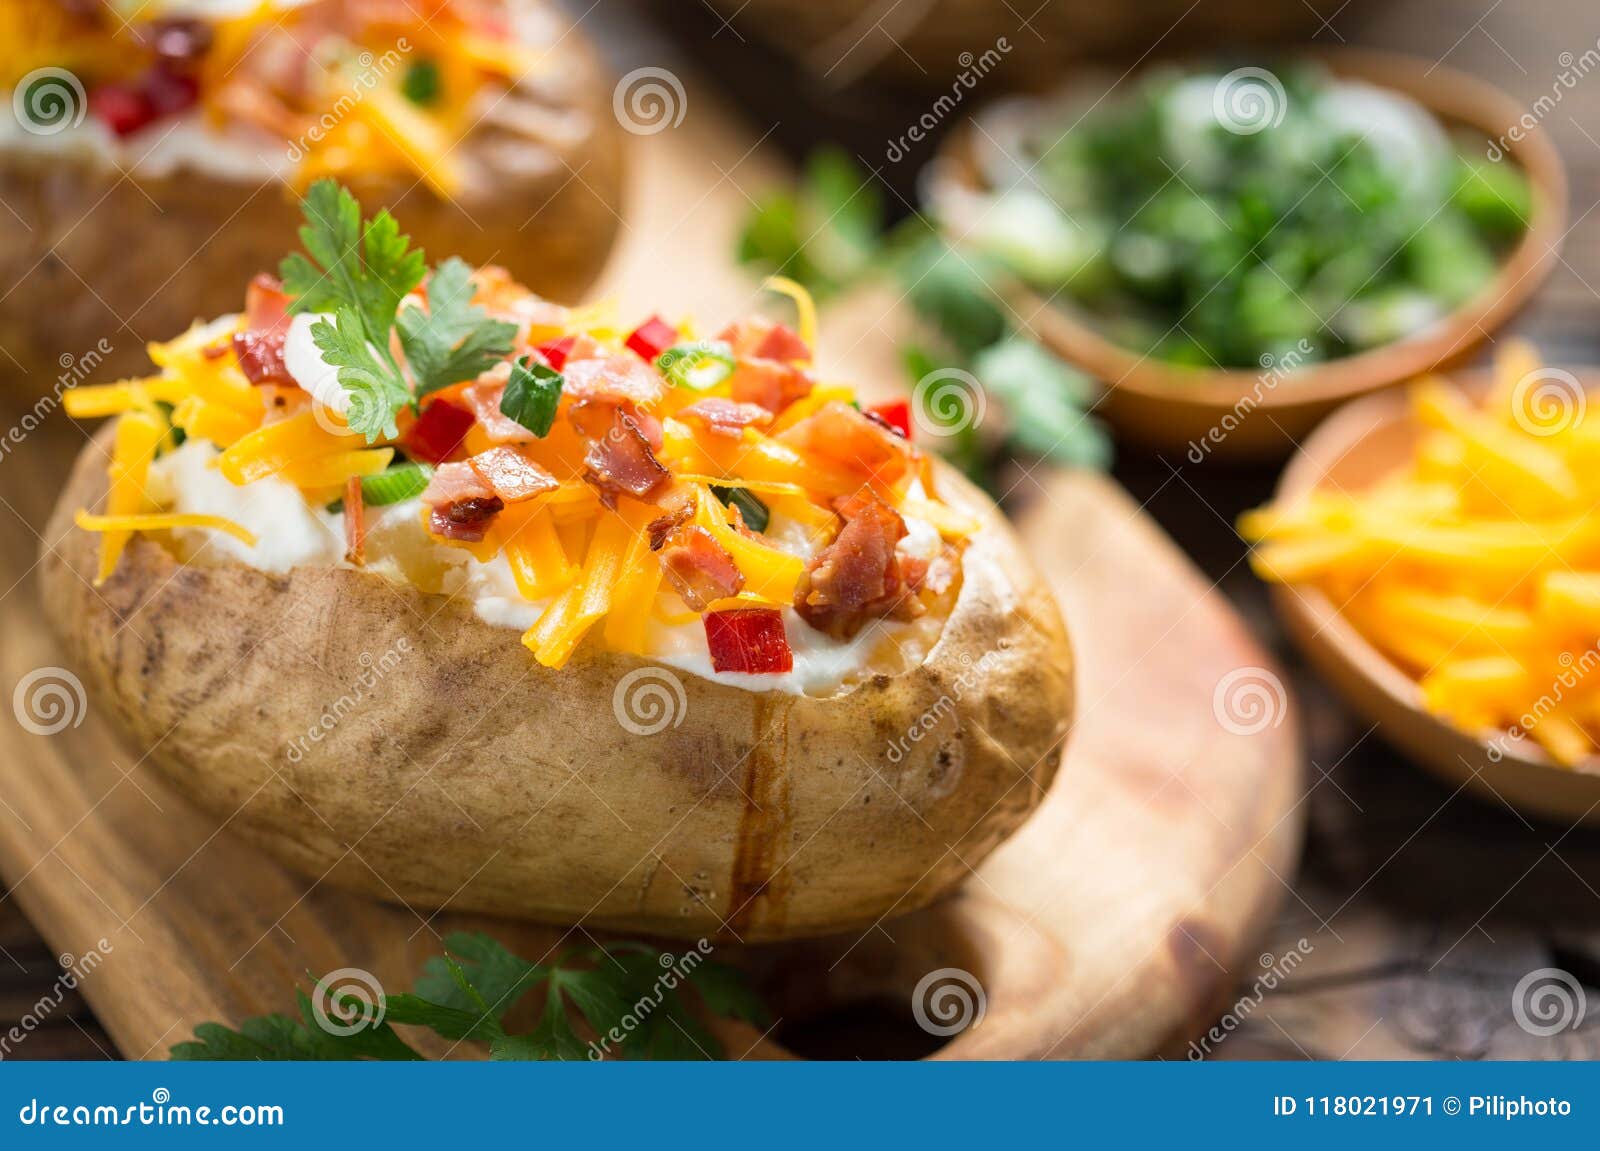 baked potatoes with cheese and bacon